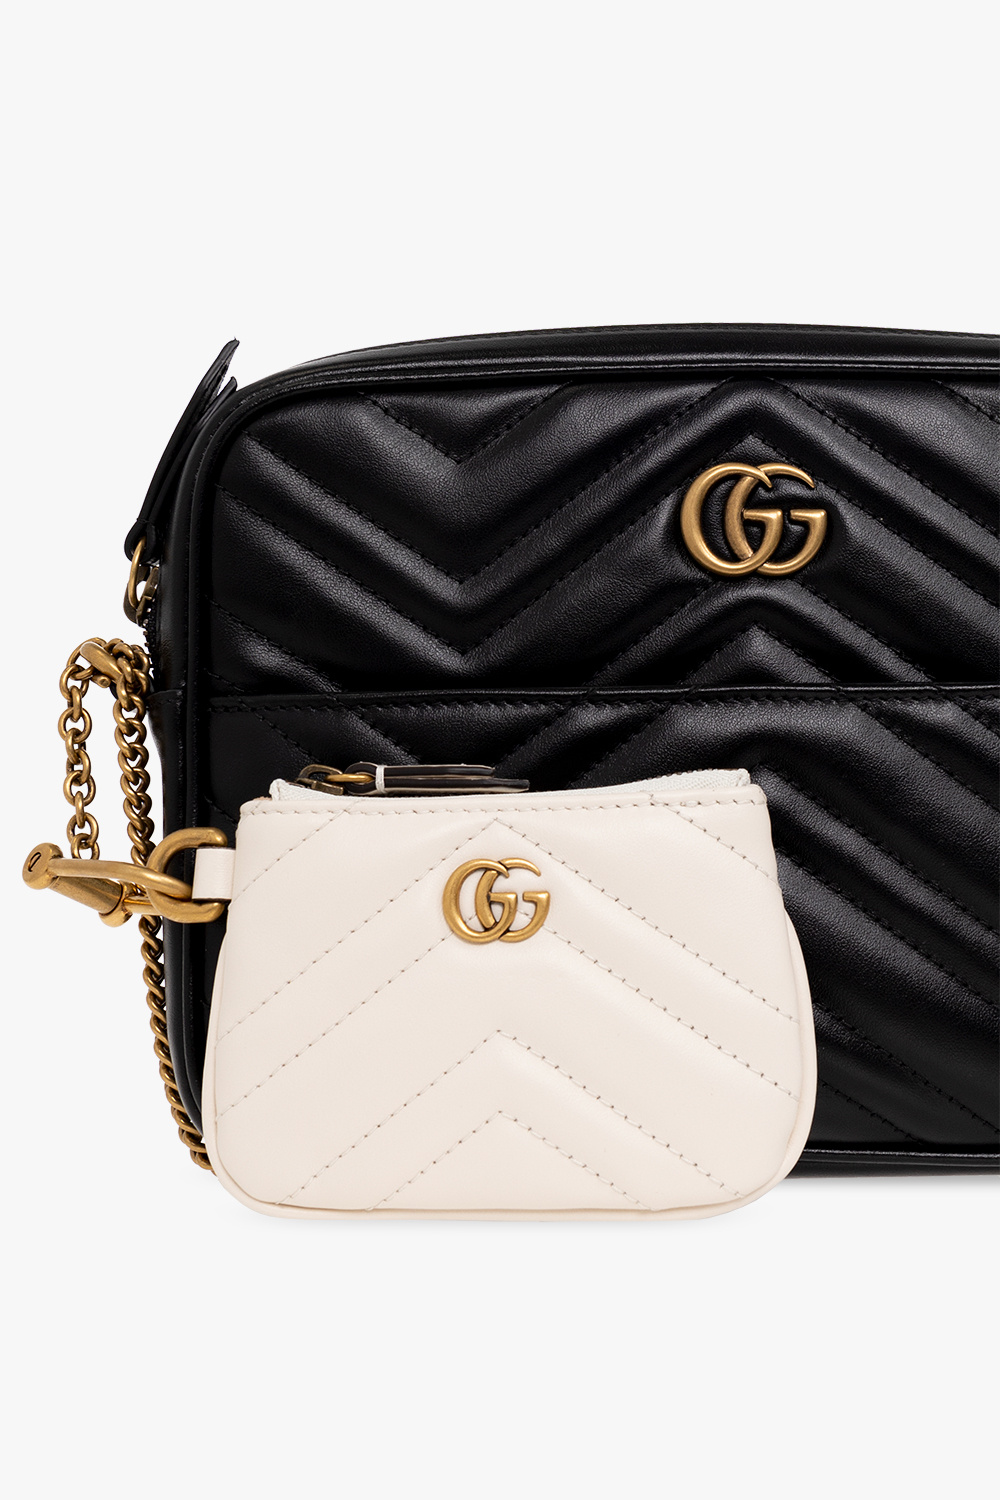 GUCCI Marmont 2.0 mini quilted leather shoulder bag | NET-A-PORTER